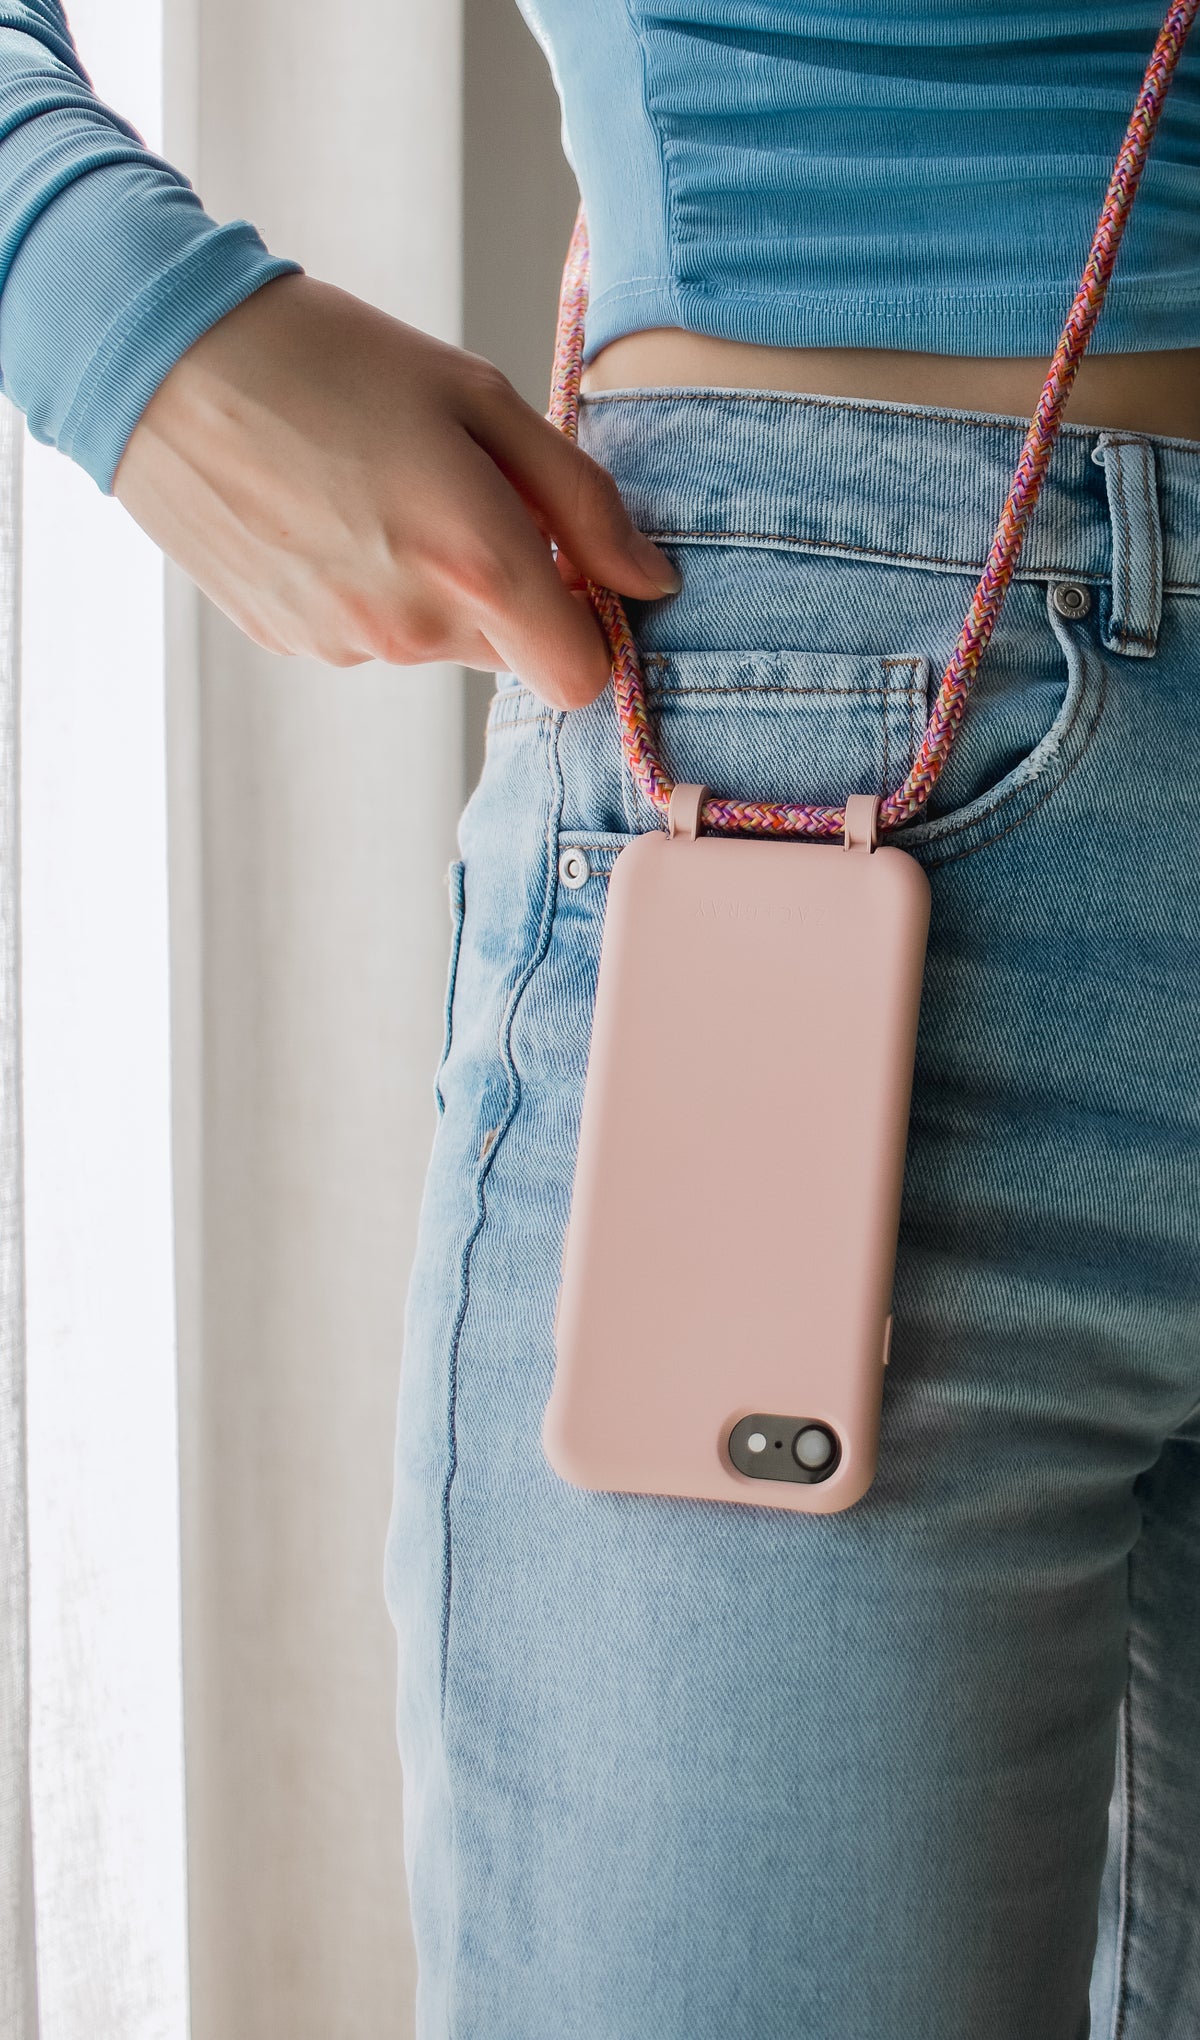 iPhone 6S+ / 7+ / 8+ ROSÉ PINK CASE + RAINBOW RED CORD